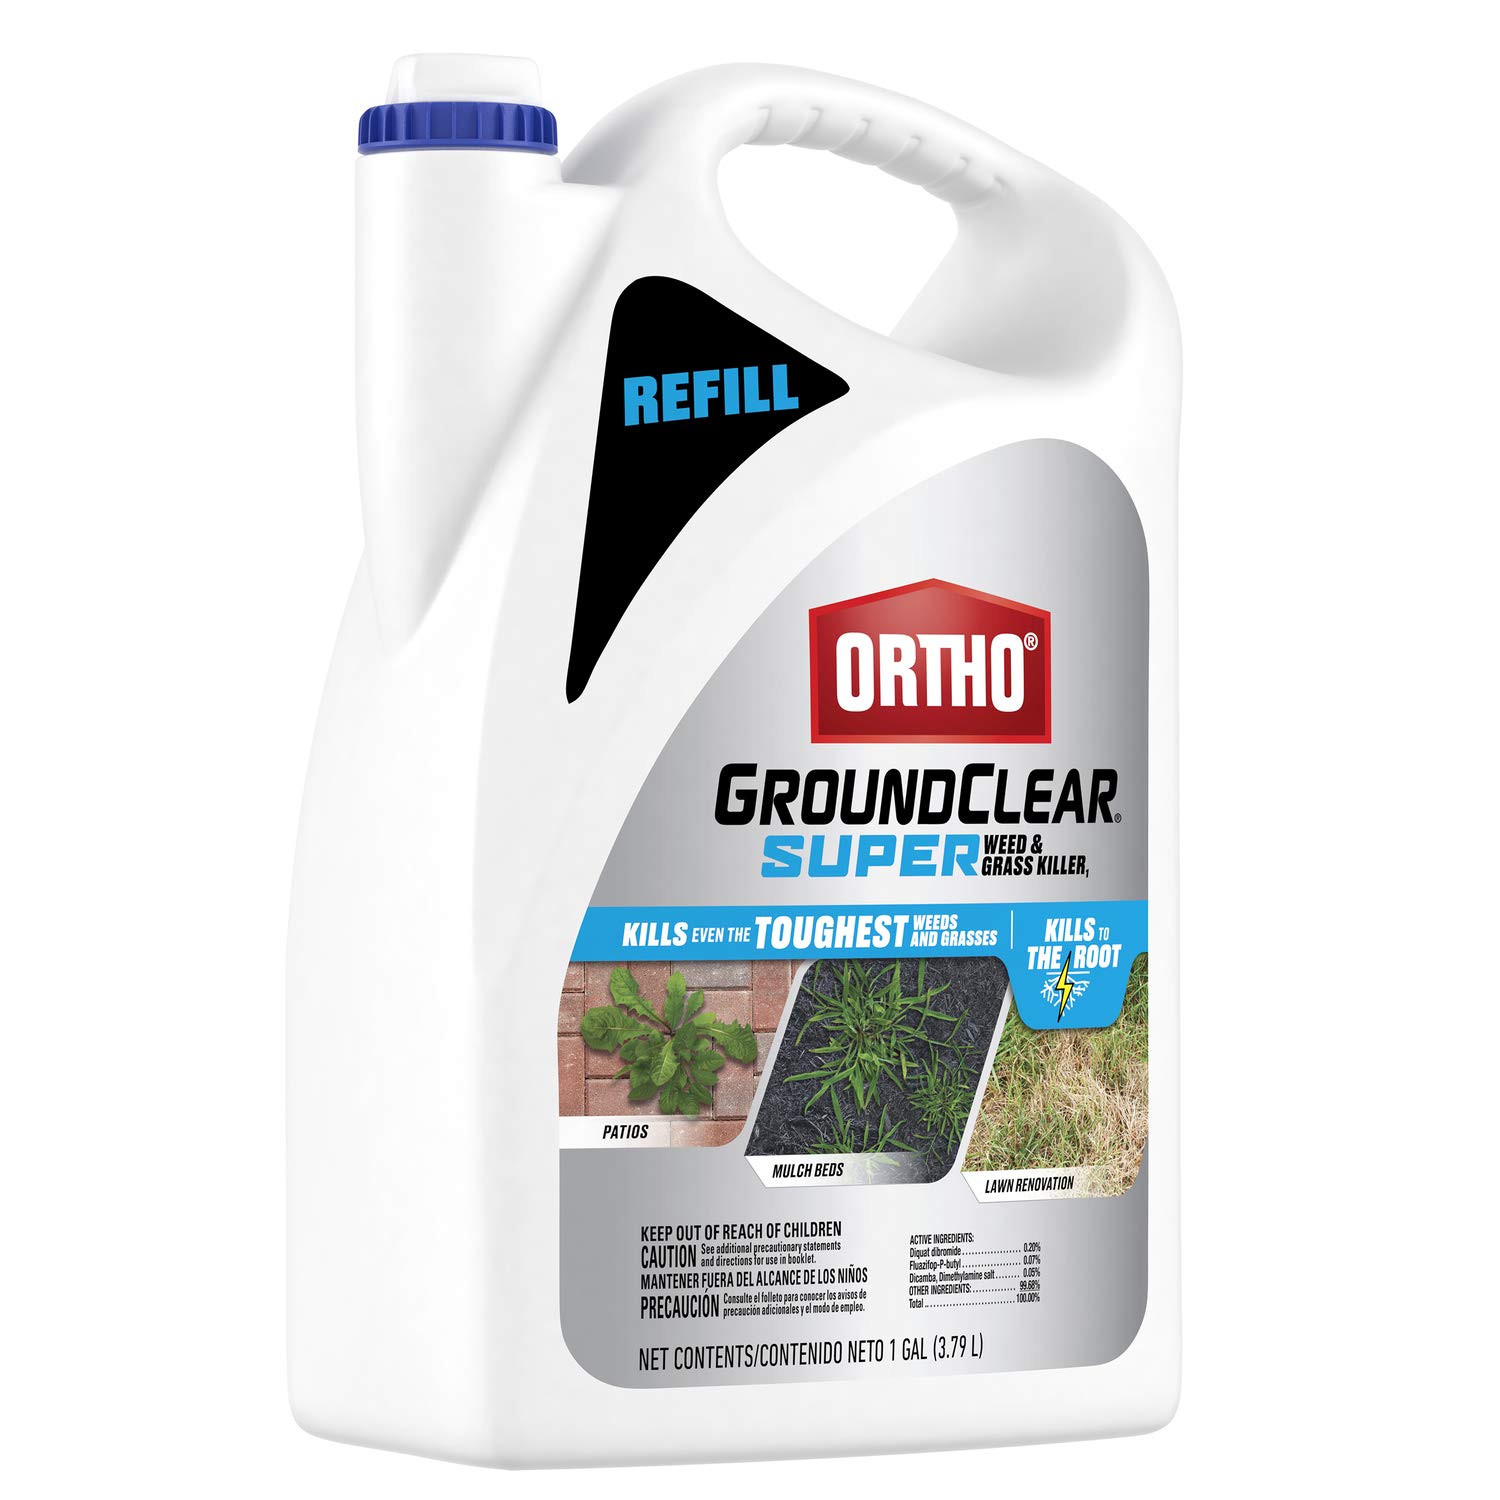 1-Gal Ortho GroundClear Super Weed & Grass Killer Refill $6.97 + Free Shipping w/ Prime or on $35+